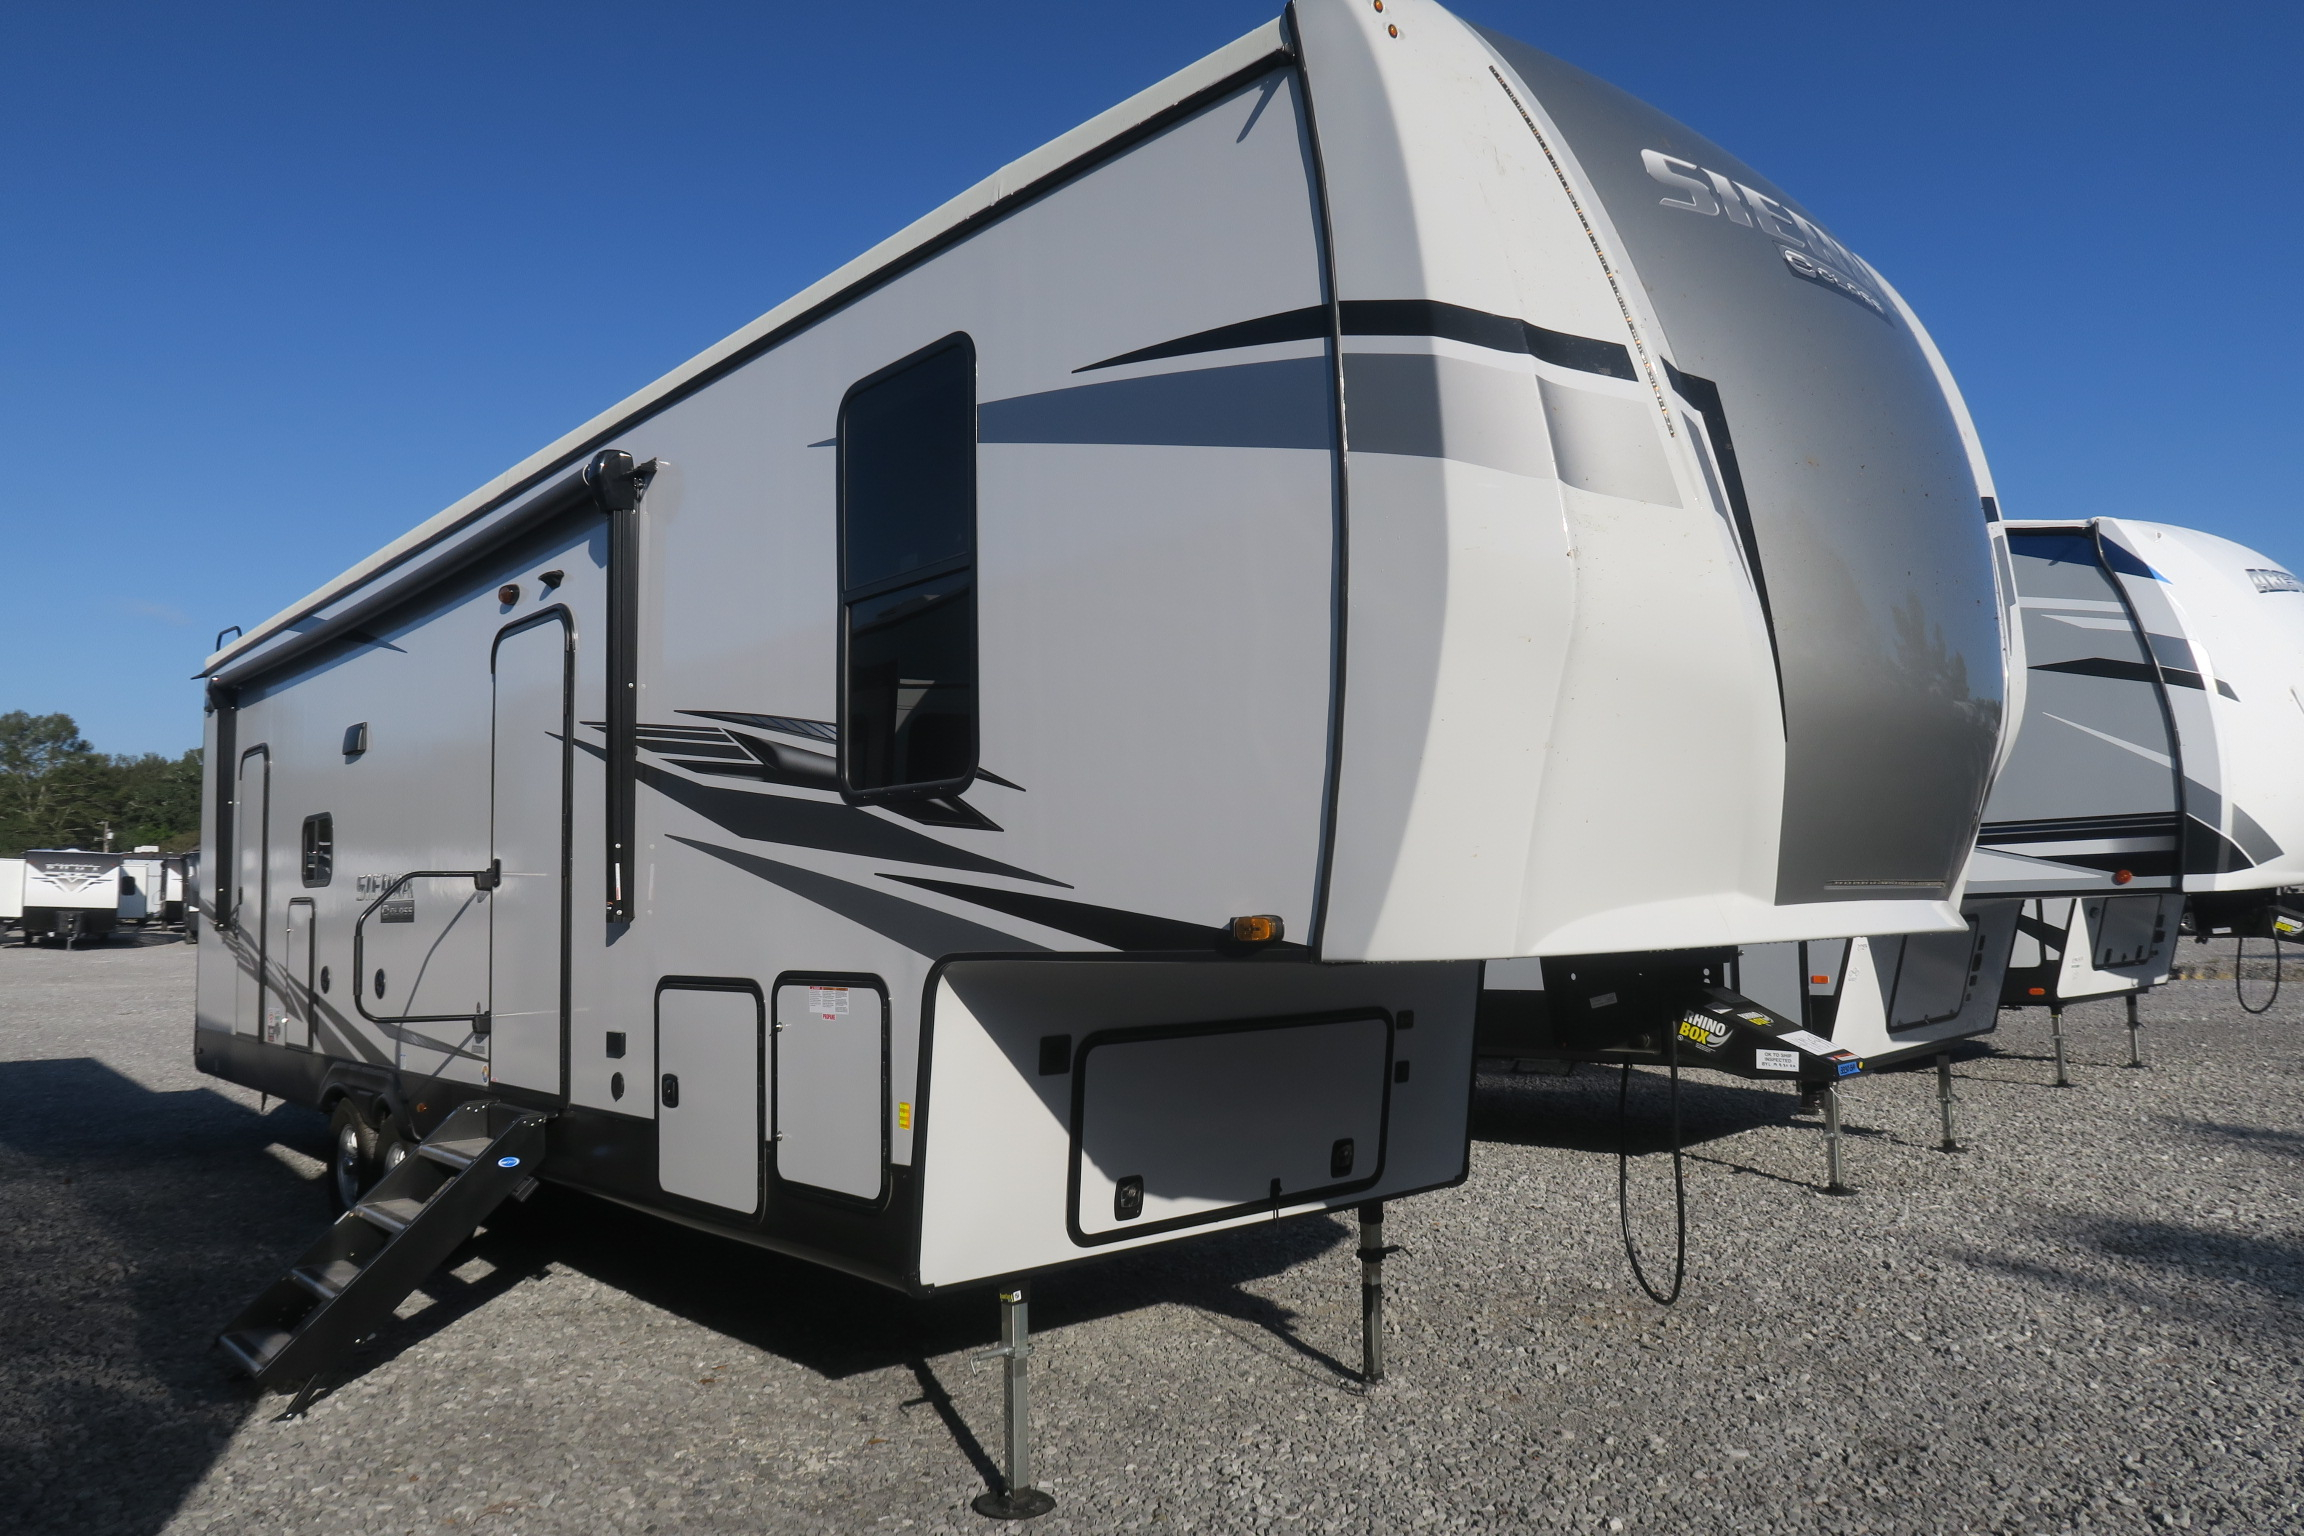 NEW 2021 SIERRA C CLASS 3330BH Overview Berryland Campers